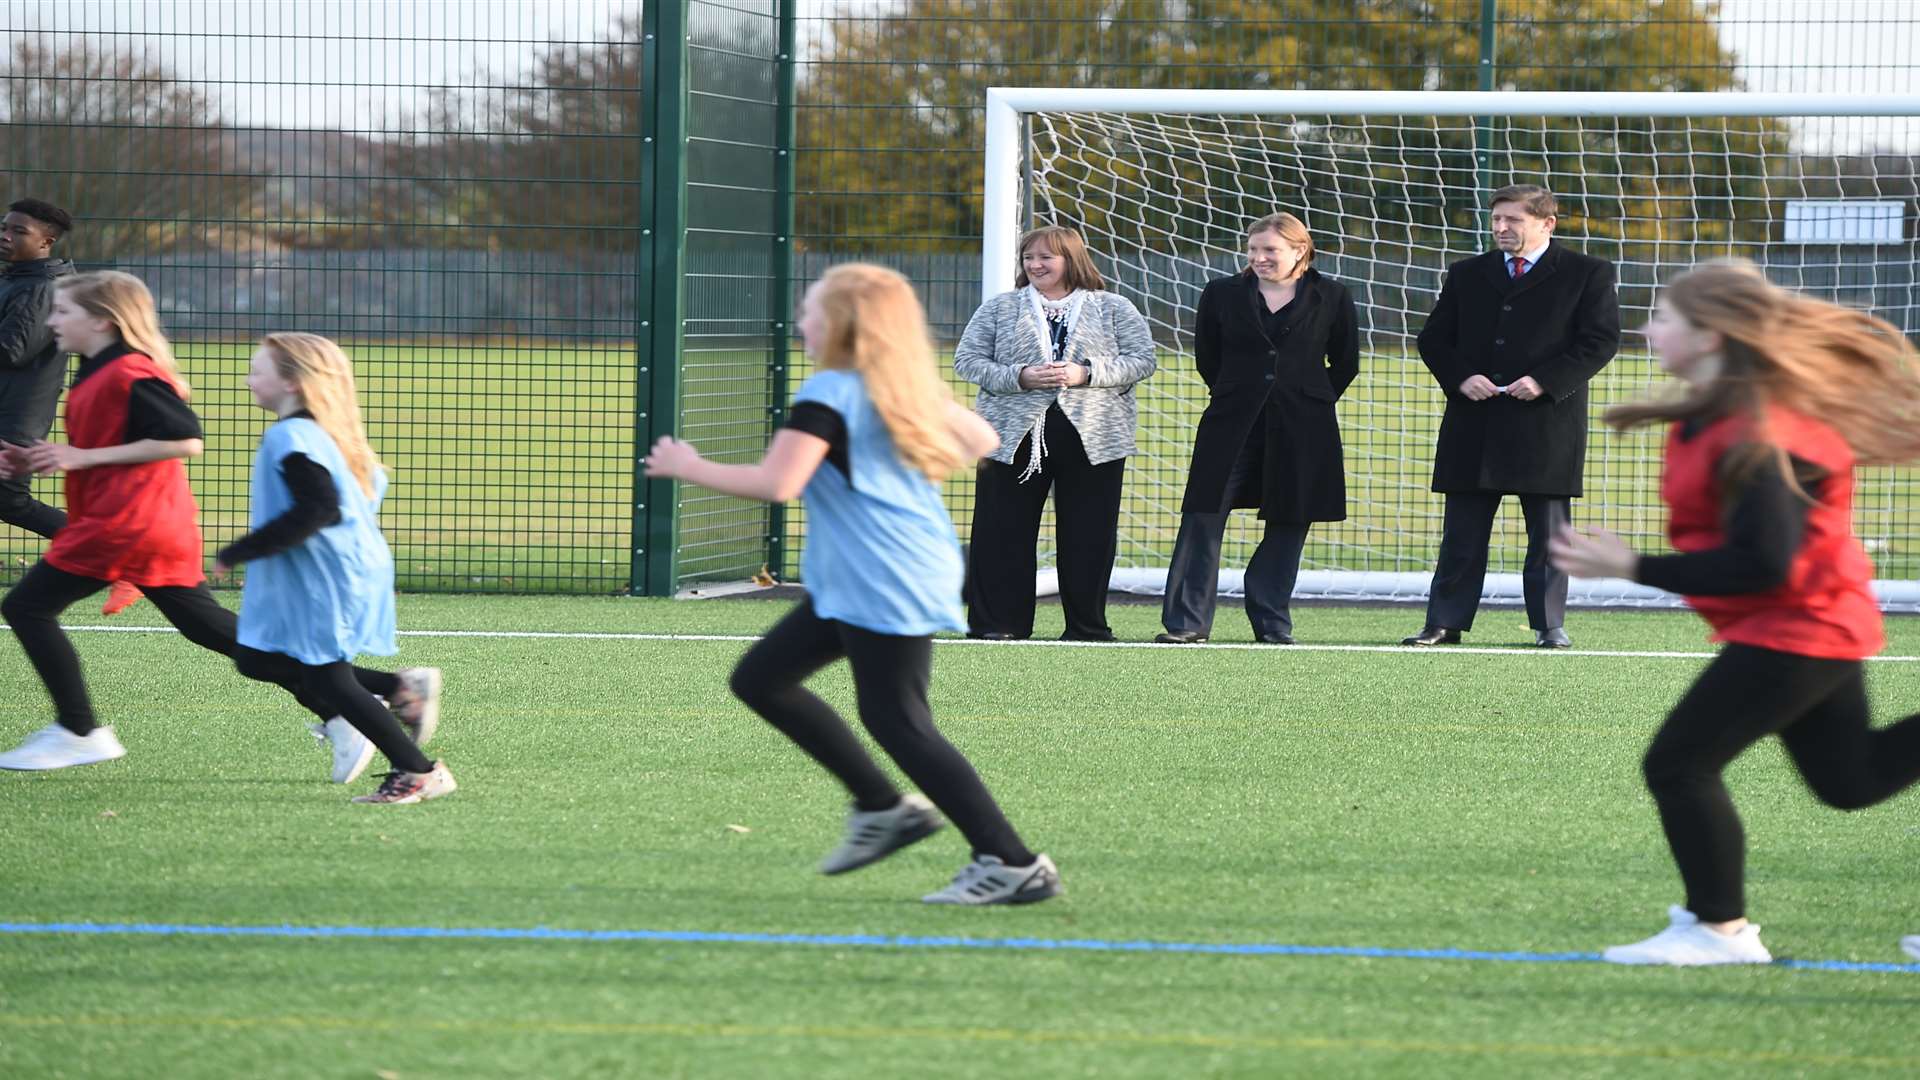 Victory Academy principal Mandy Gage, sports minister and Chatham MP Tracey Crouch and the Football Foundation's chief executive officer, Paul Thorogood, watch students using the new pitch